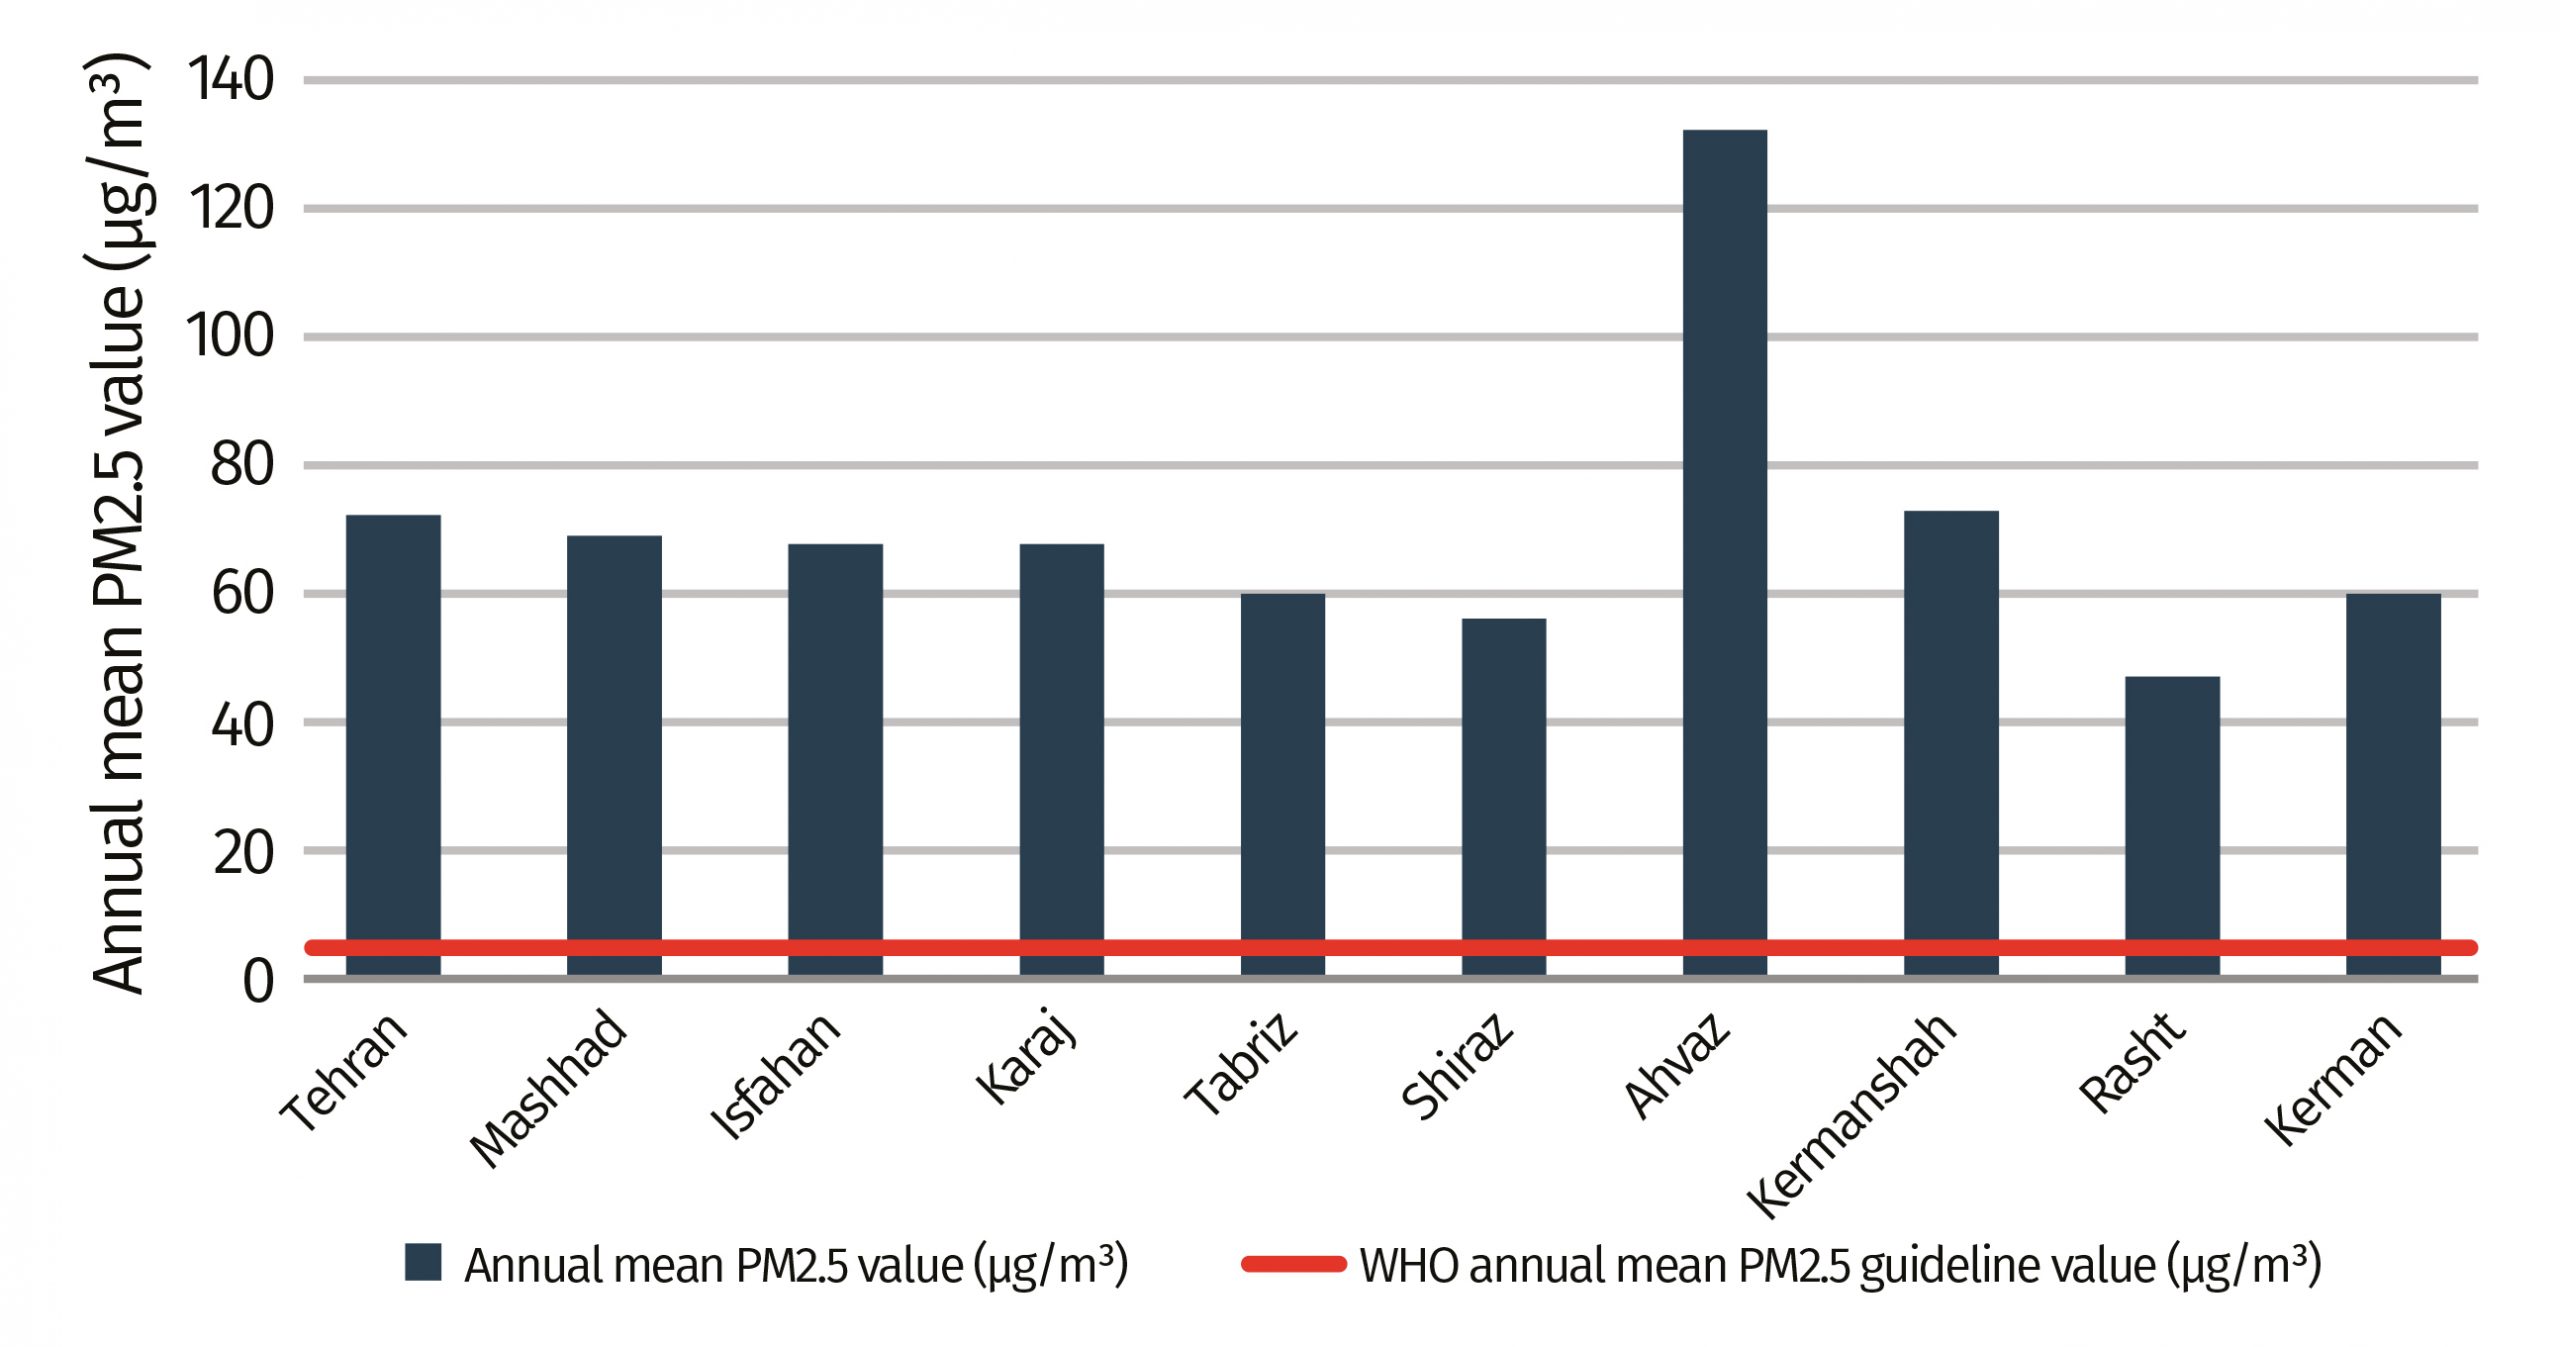 Annual mean PM2.5 in Iran cities